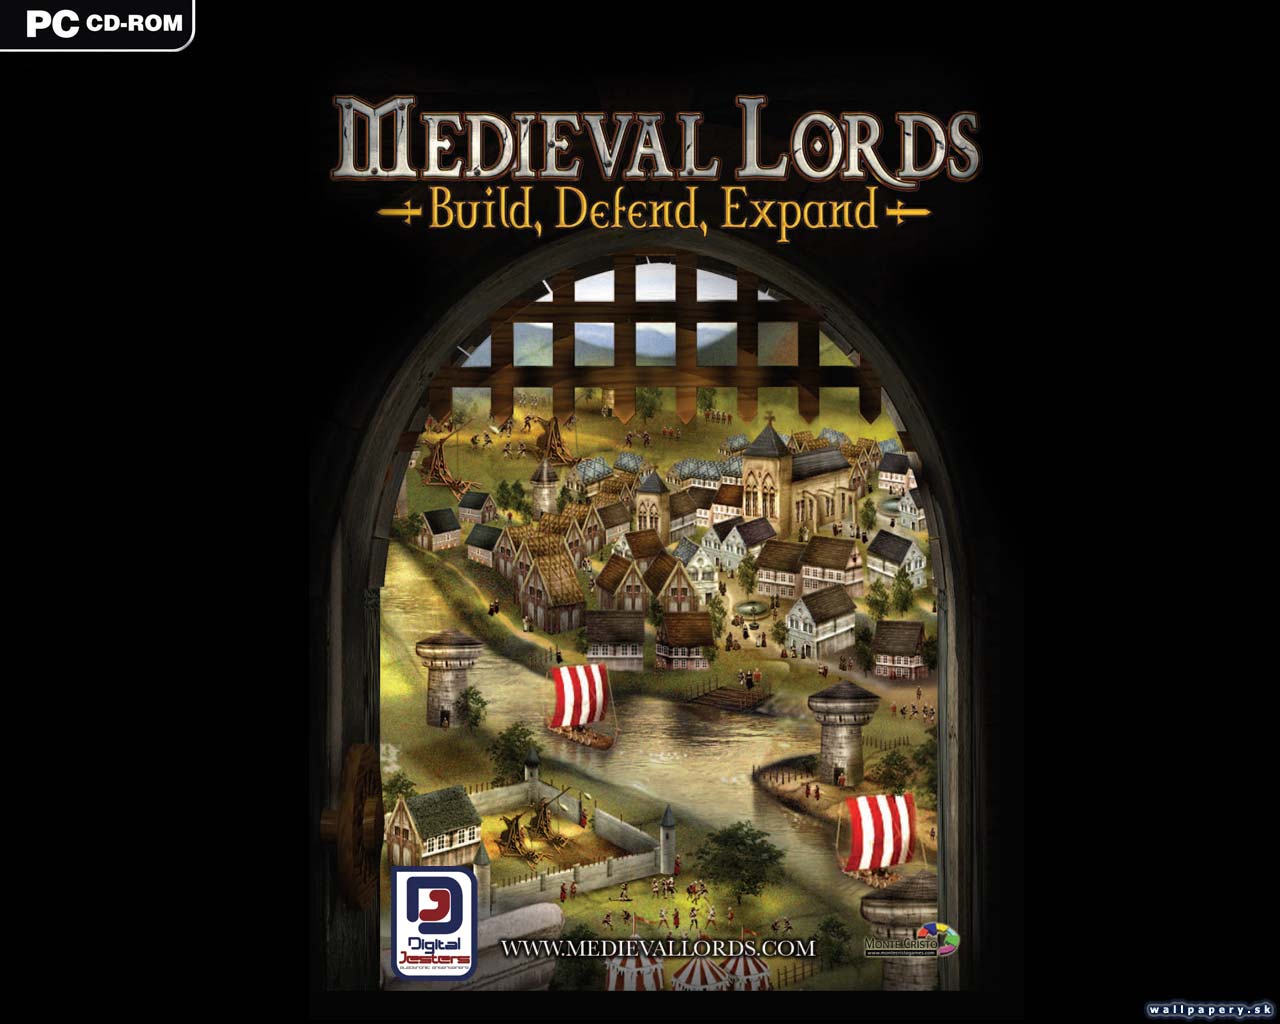 Medieval Lords: Build, Defend, Expand - wallpaper 3